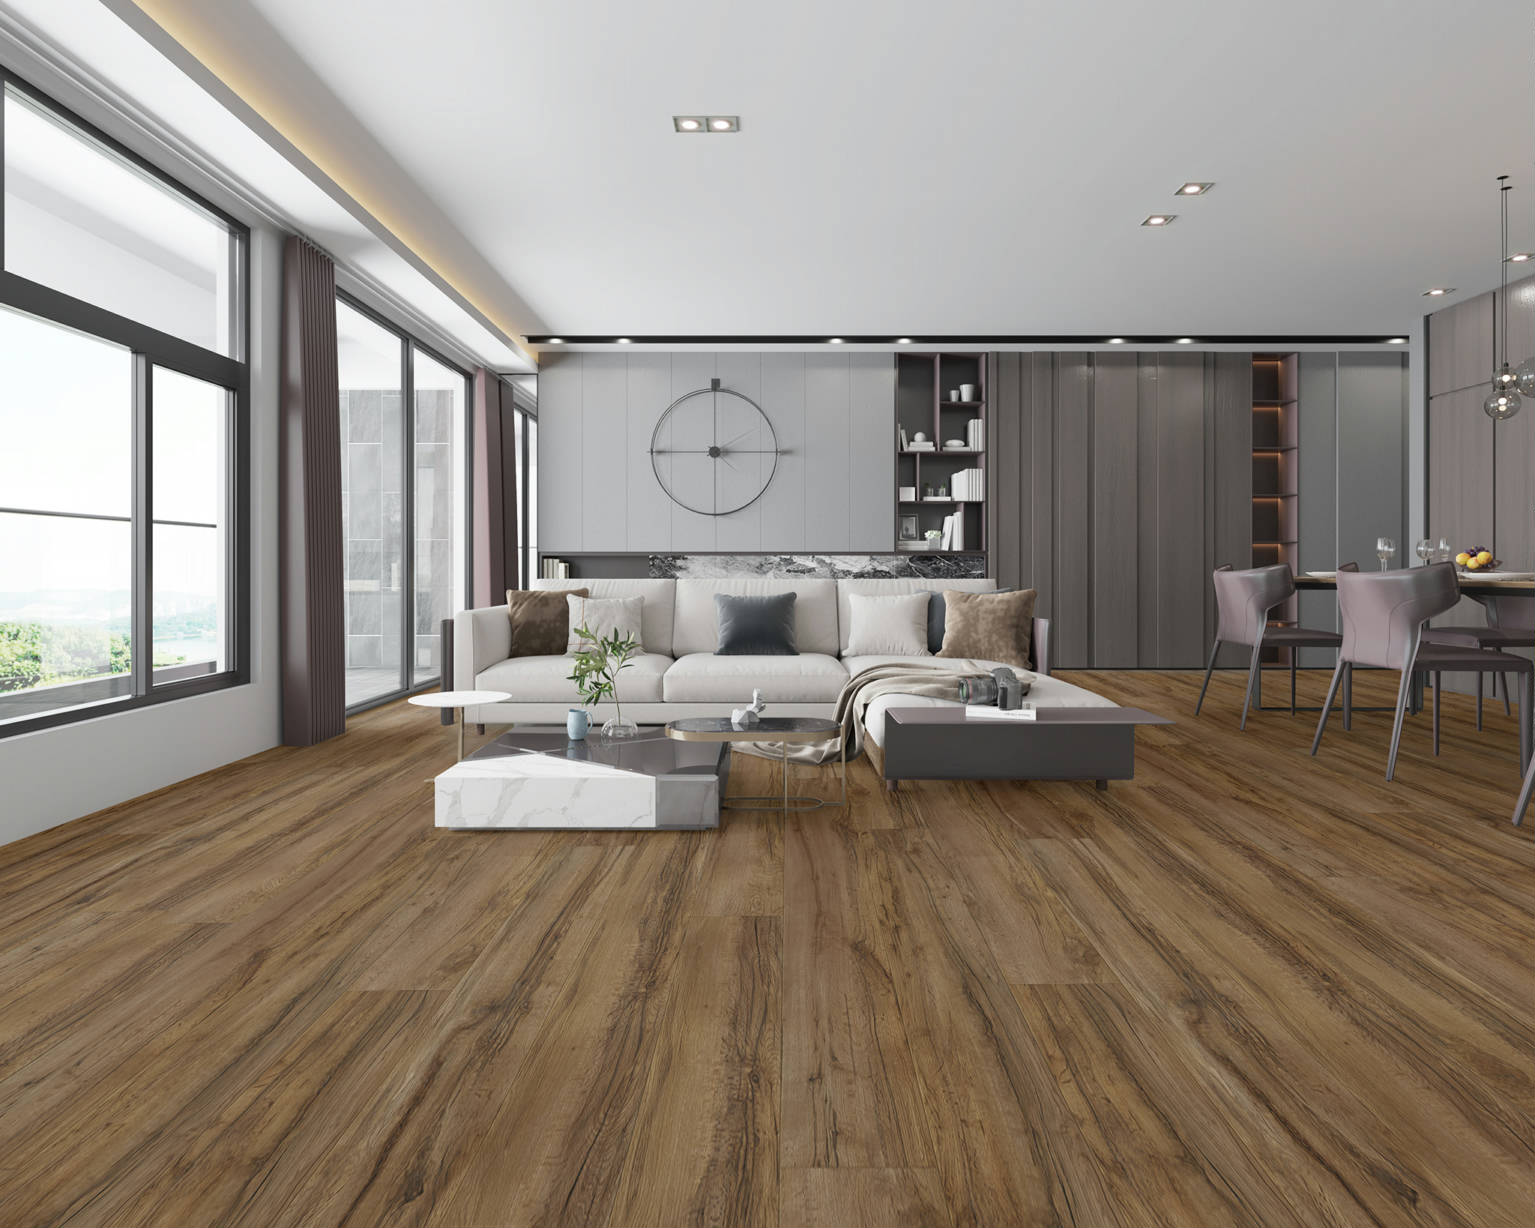 Timber Ridge Gold 20 4 | Qualis Ceramica | Luxury Tile and Vinyl at affordable prices